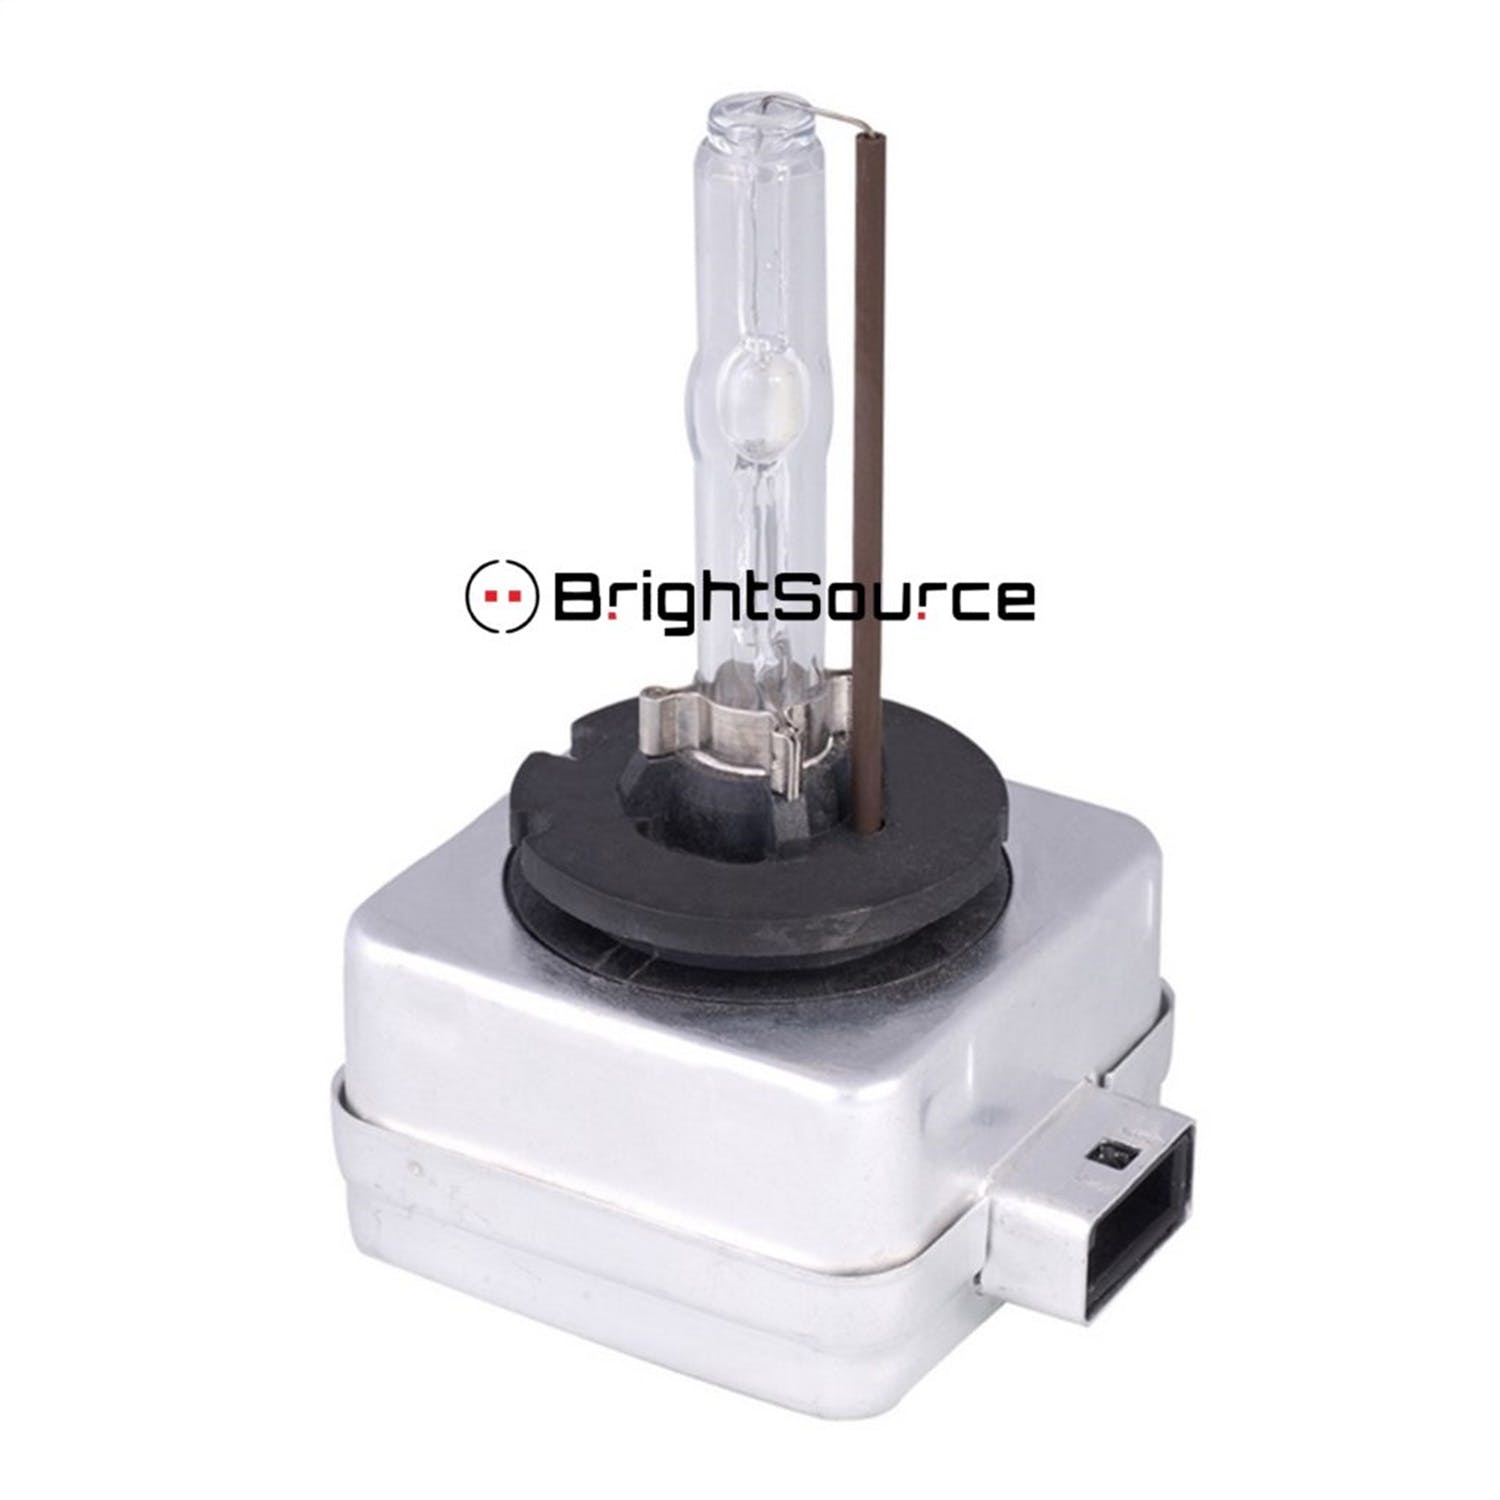 BrightSource D3S43 Single D3 OE Replacement/Upgrade Bulb 4300K